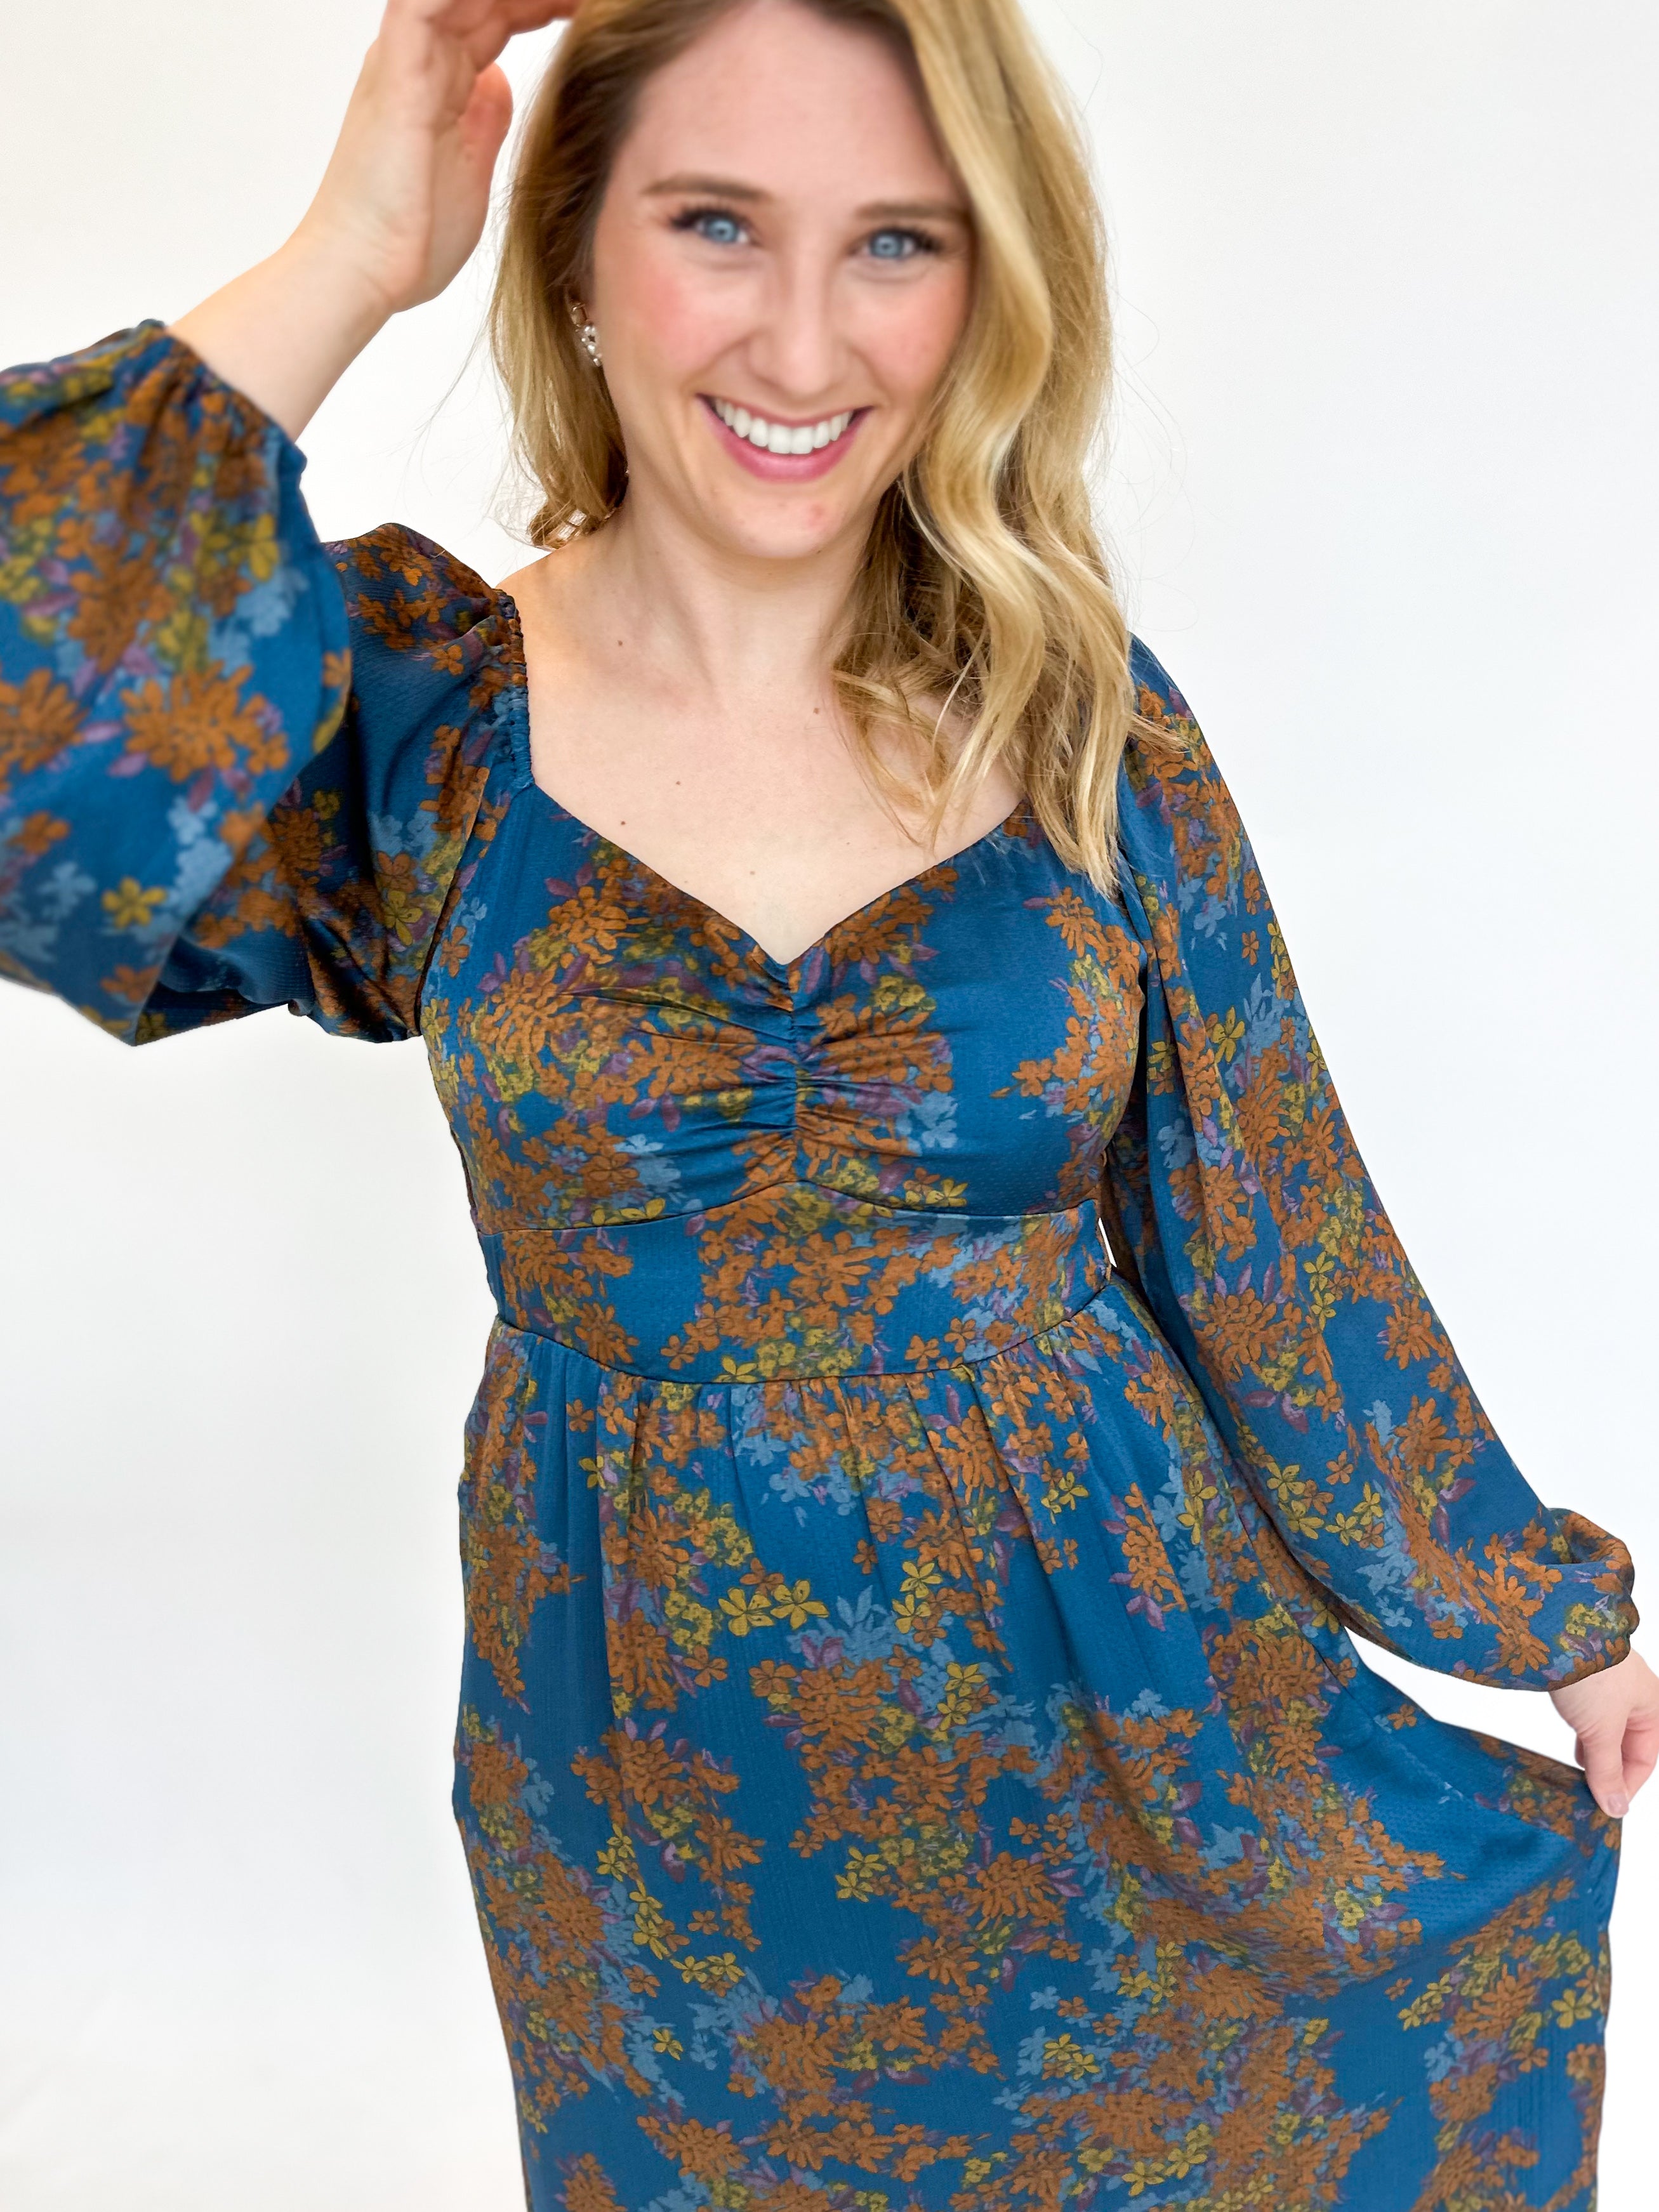 Deep Teal Floral Midi Dress-500 Midi-SKIES ARE BLUE-July & June Women's Fashion Boutique Located in San Antonio, Texas